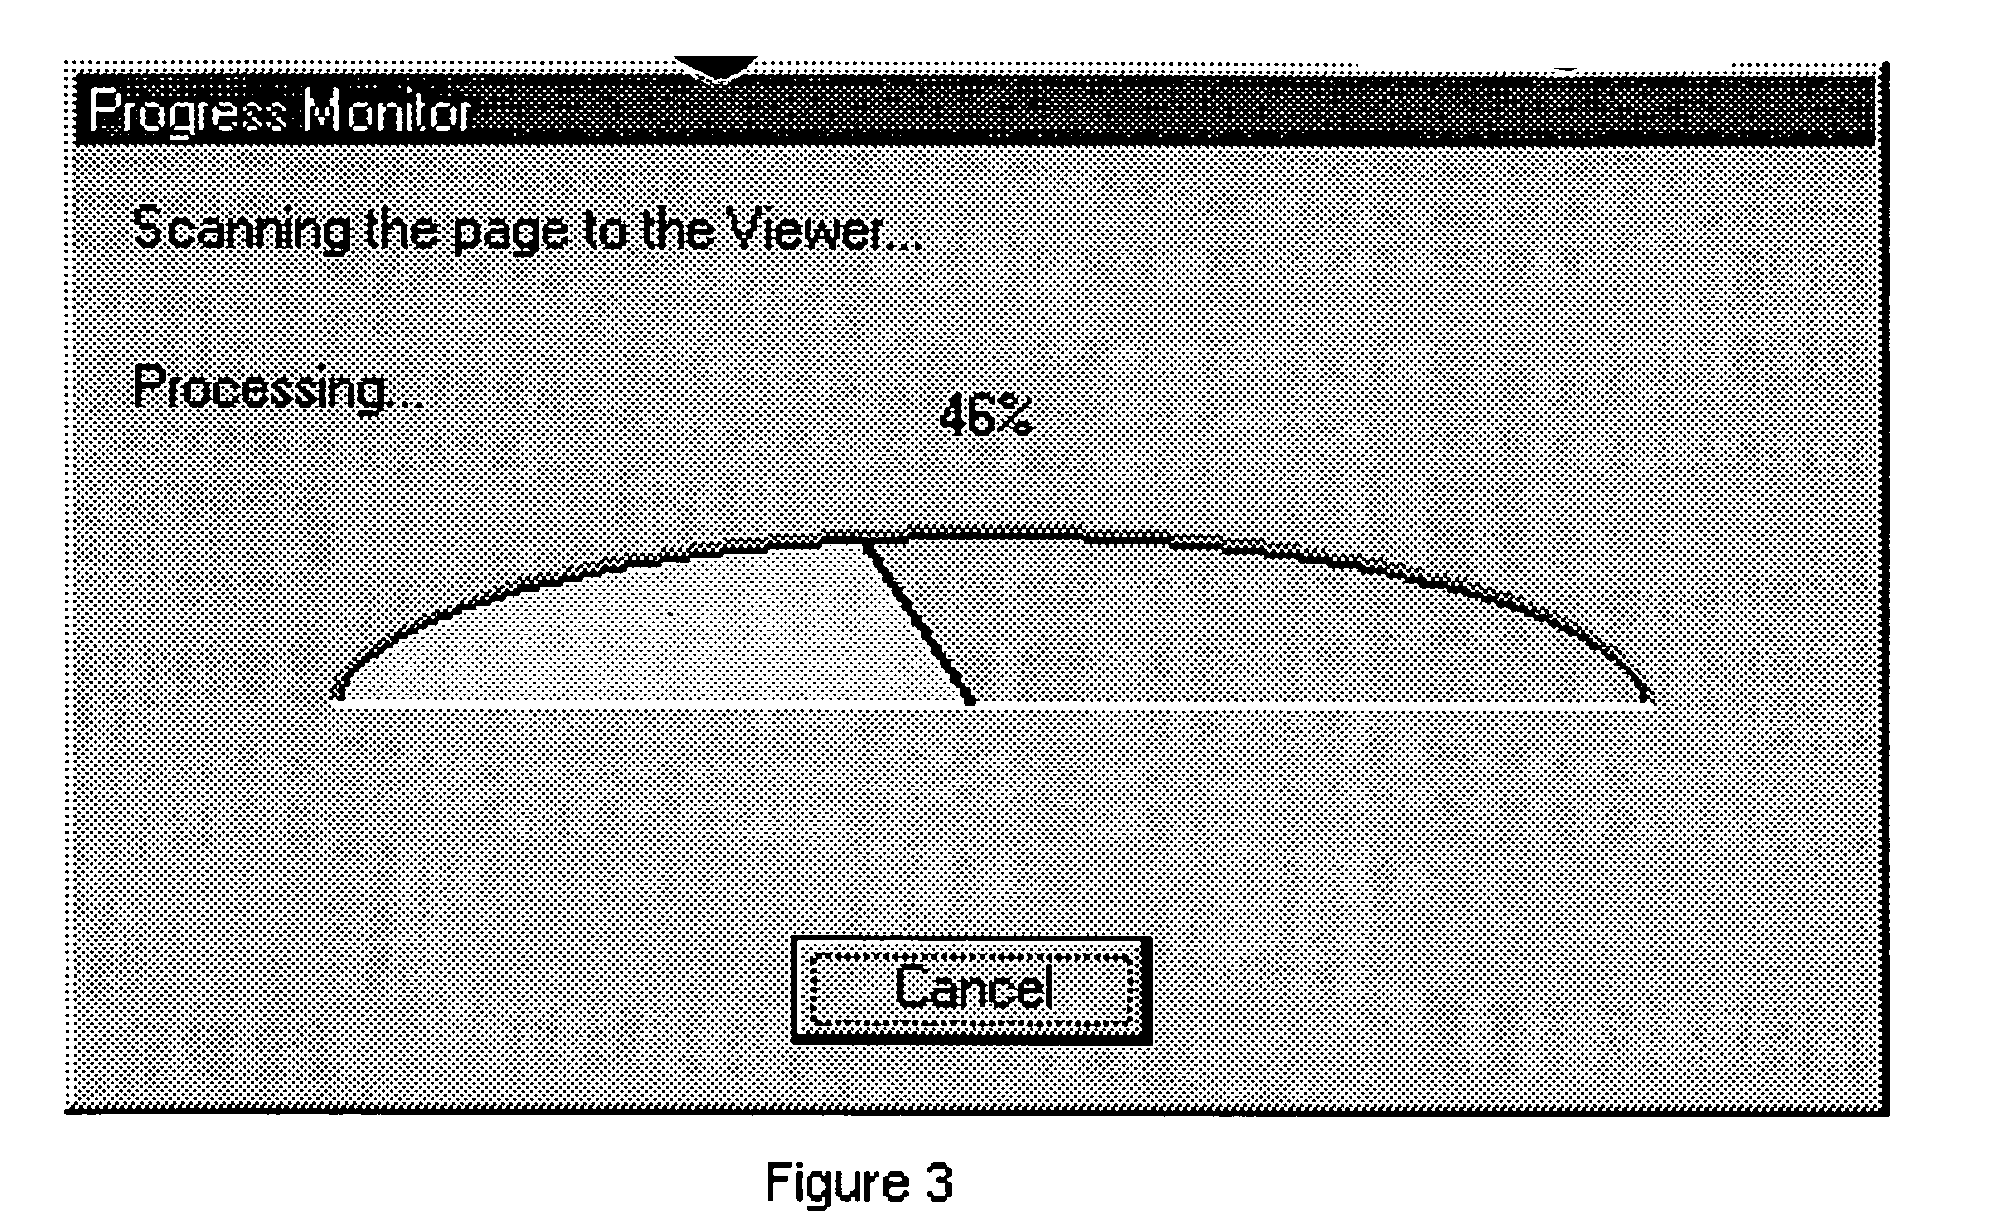 Method and apparatus for improving a progress monitor during a long computer process